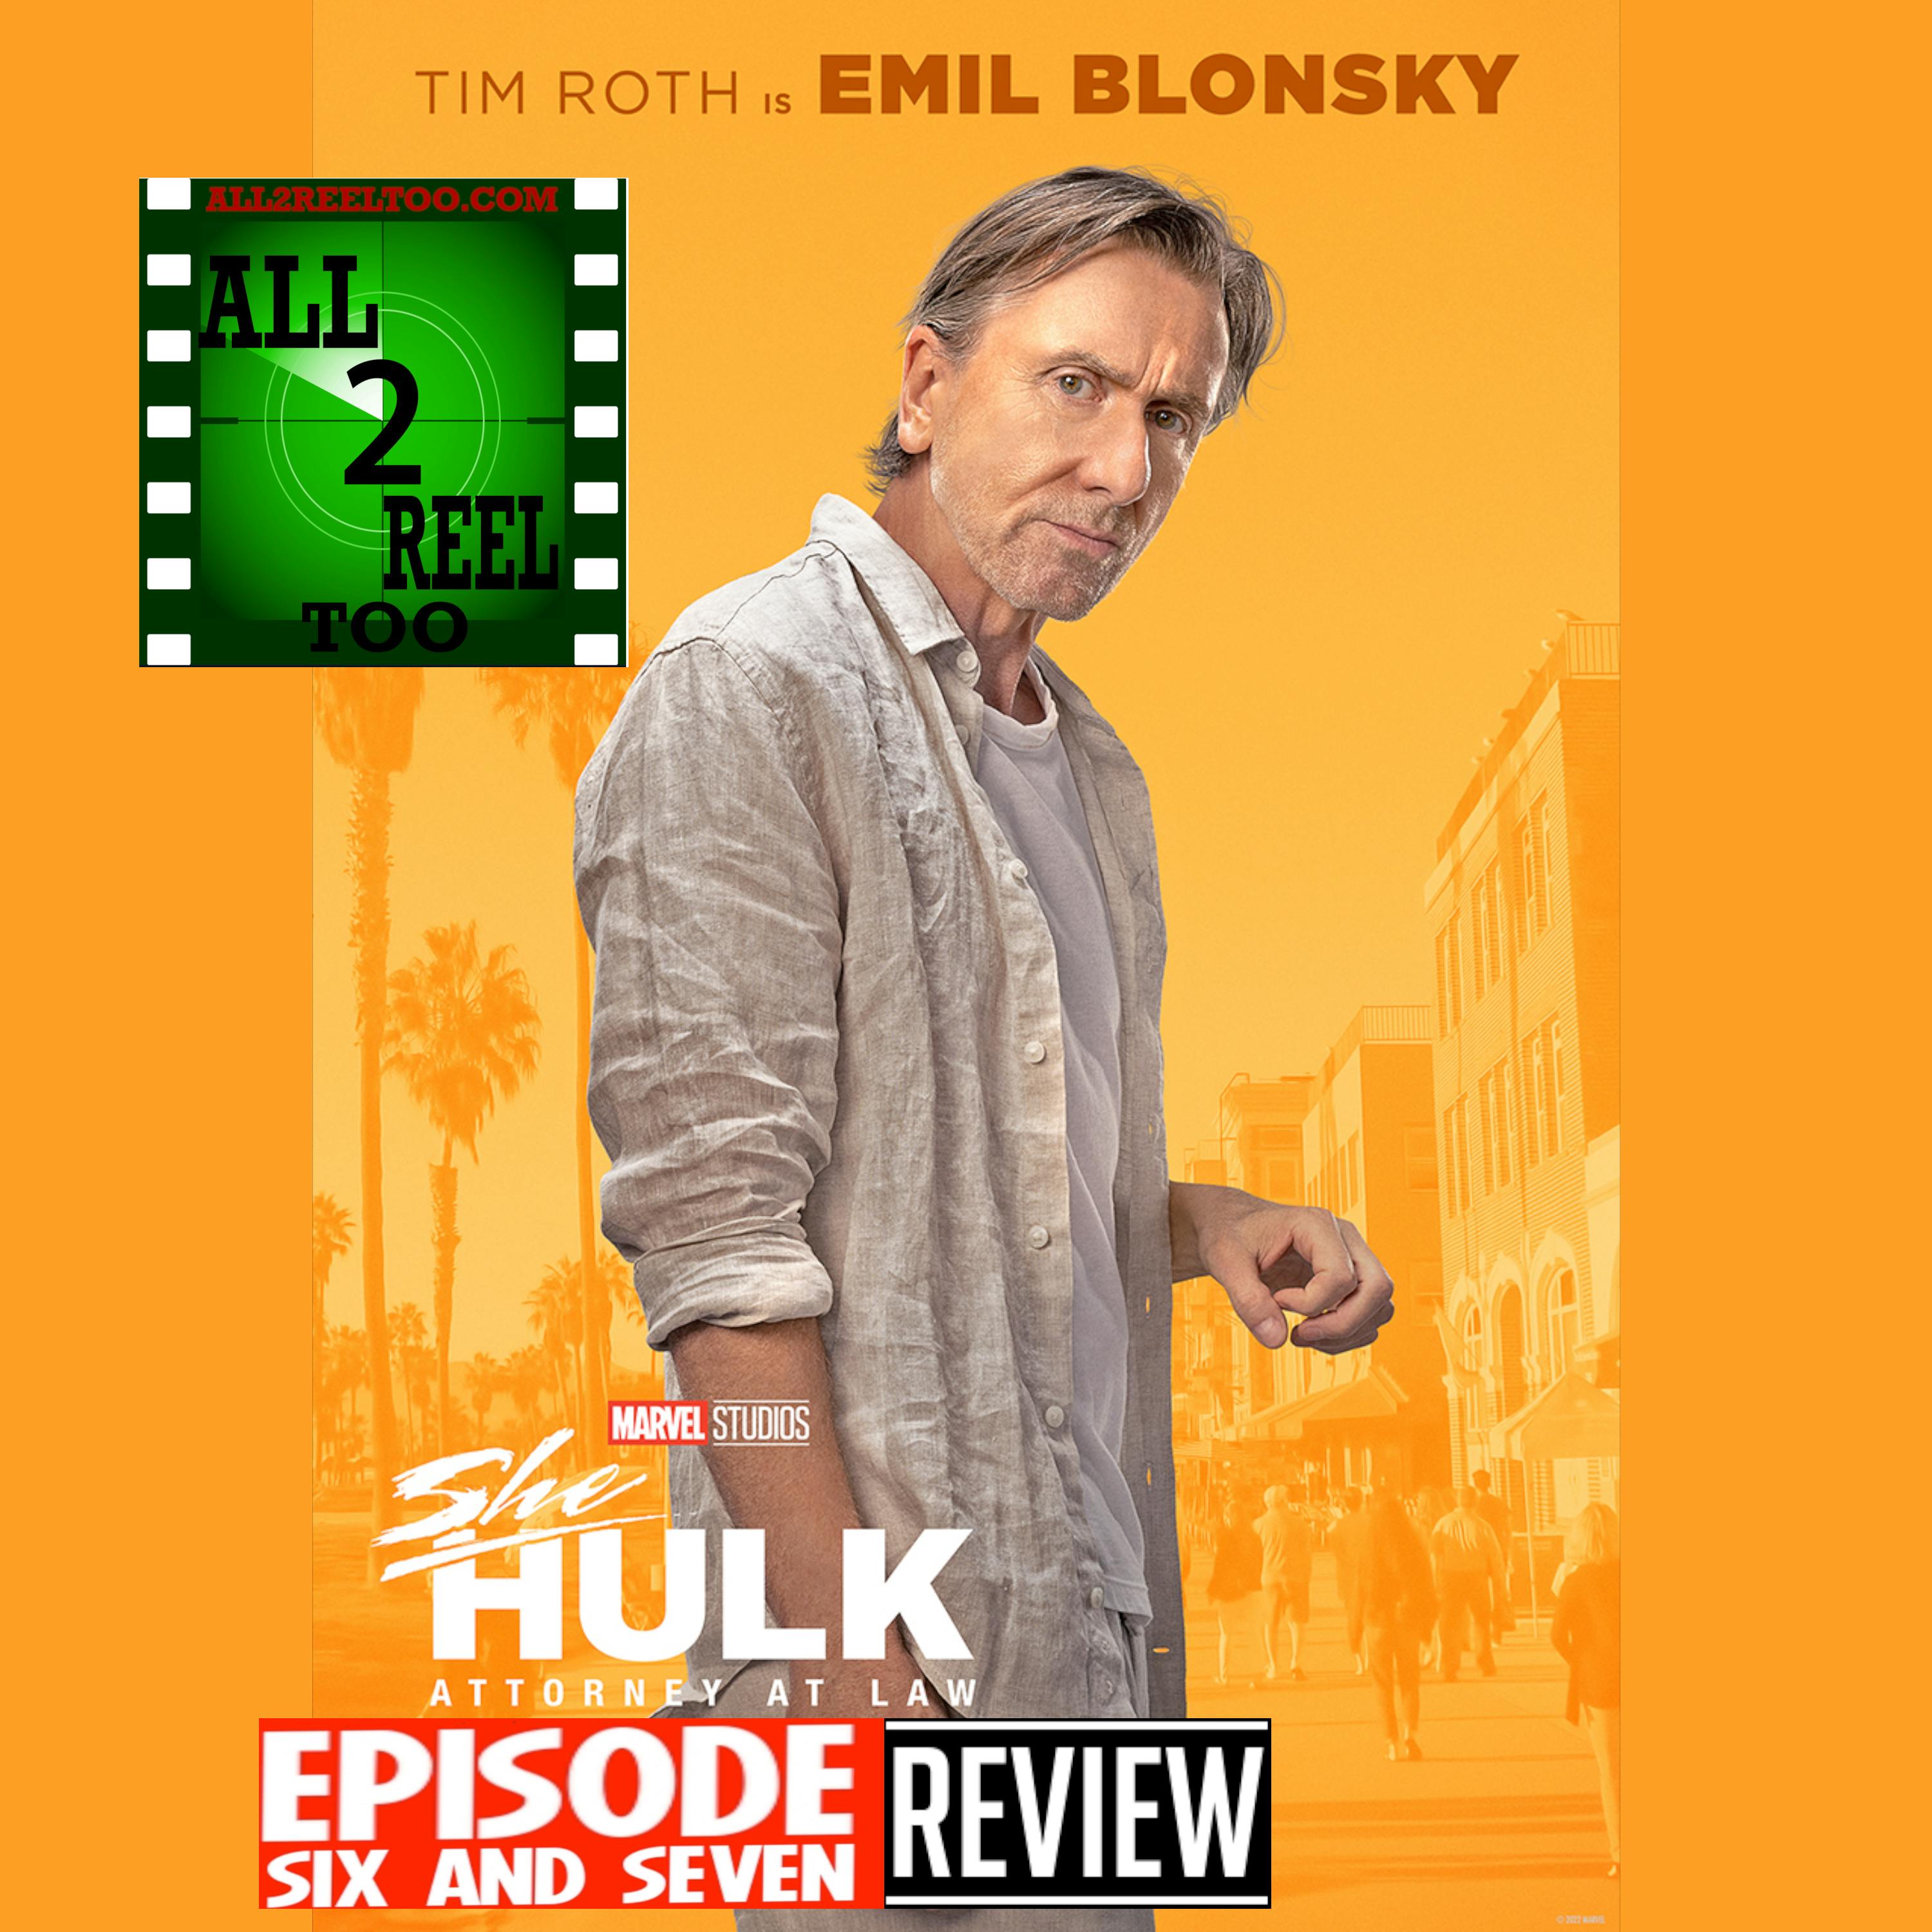 She-Hulk: Attorney at Law - EPISODE 6 and 7 REVIEW Image